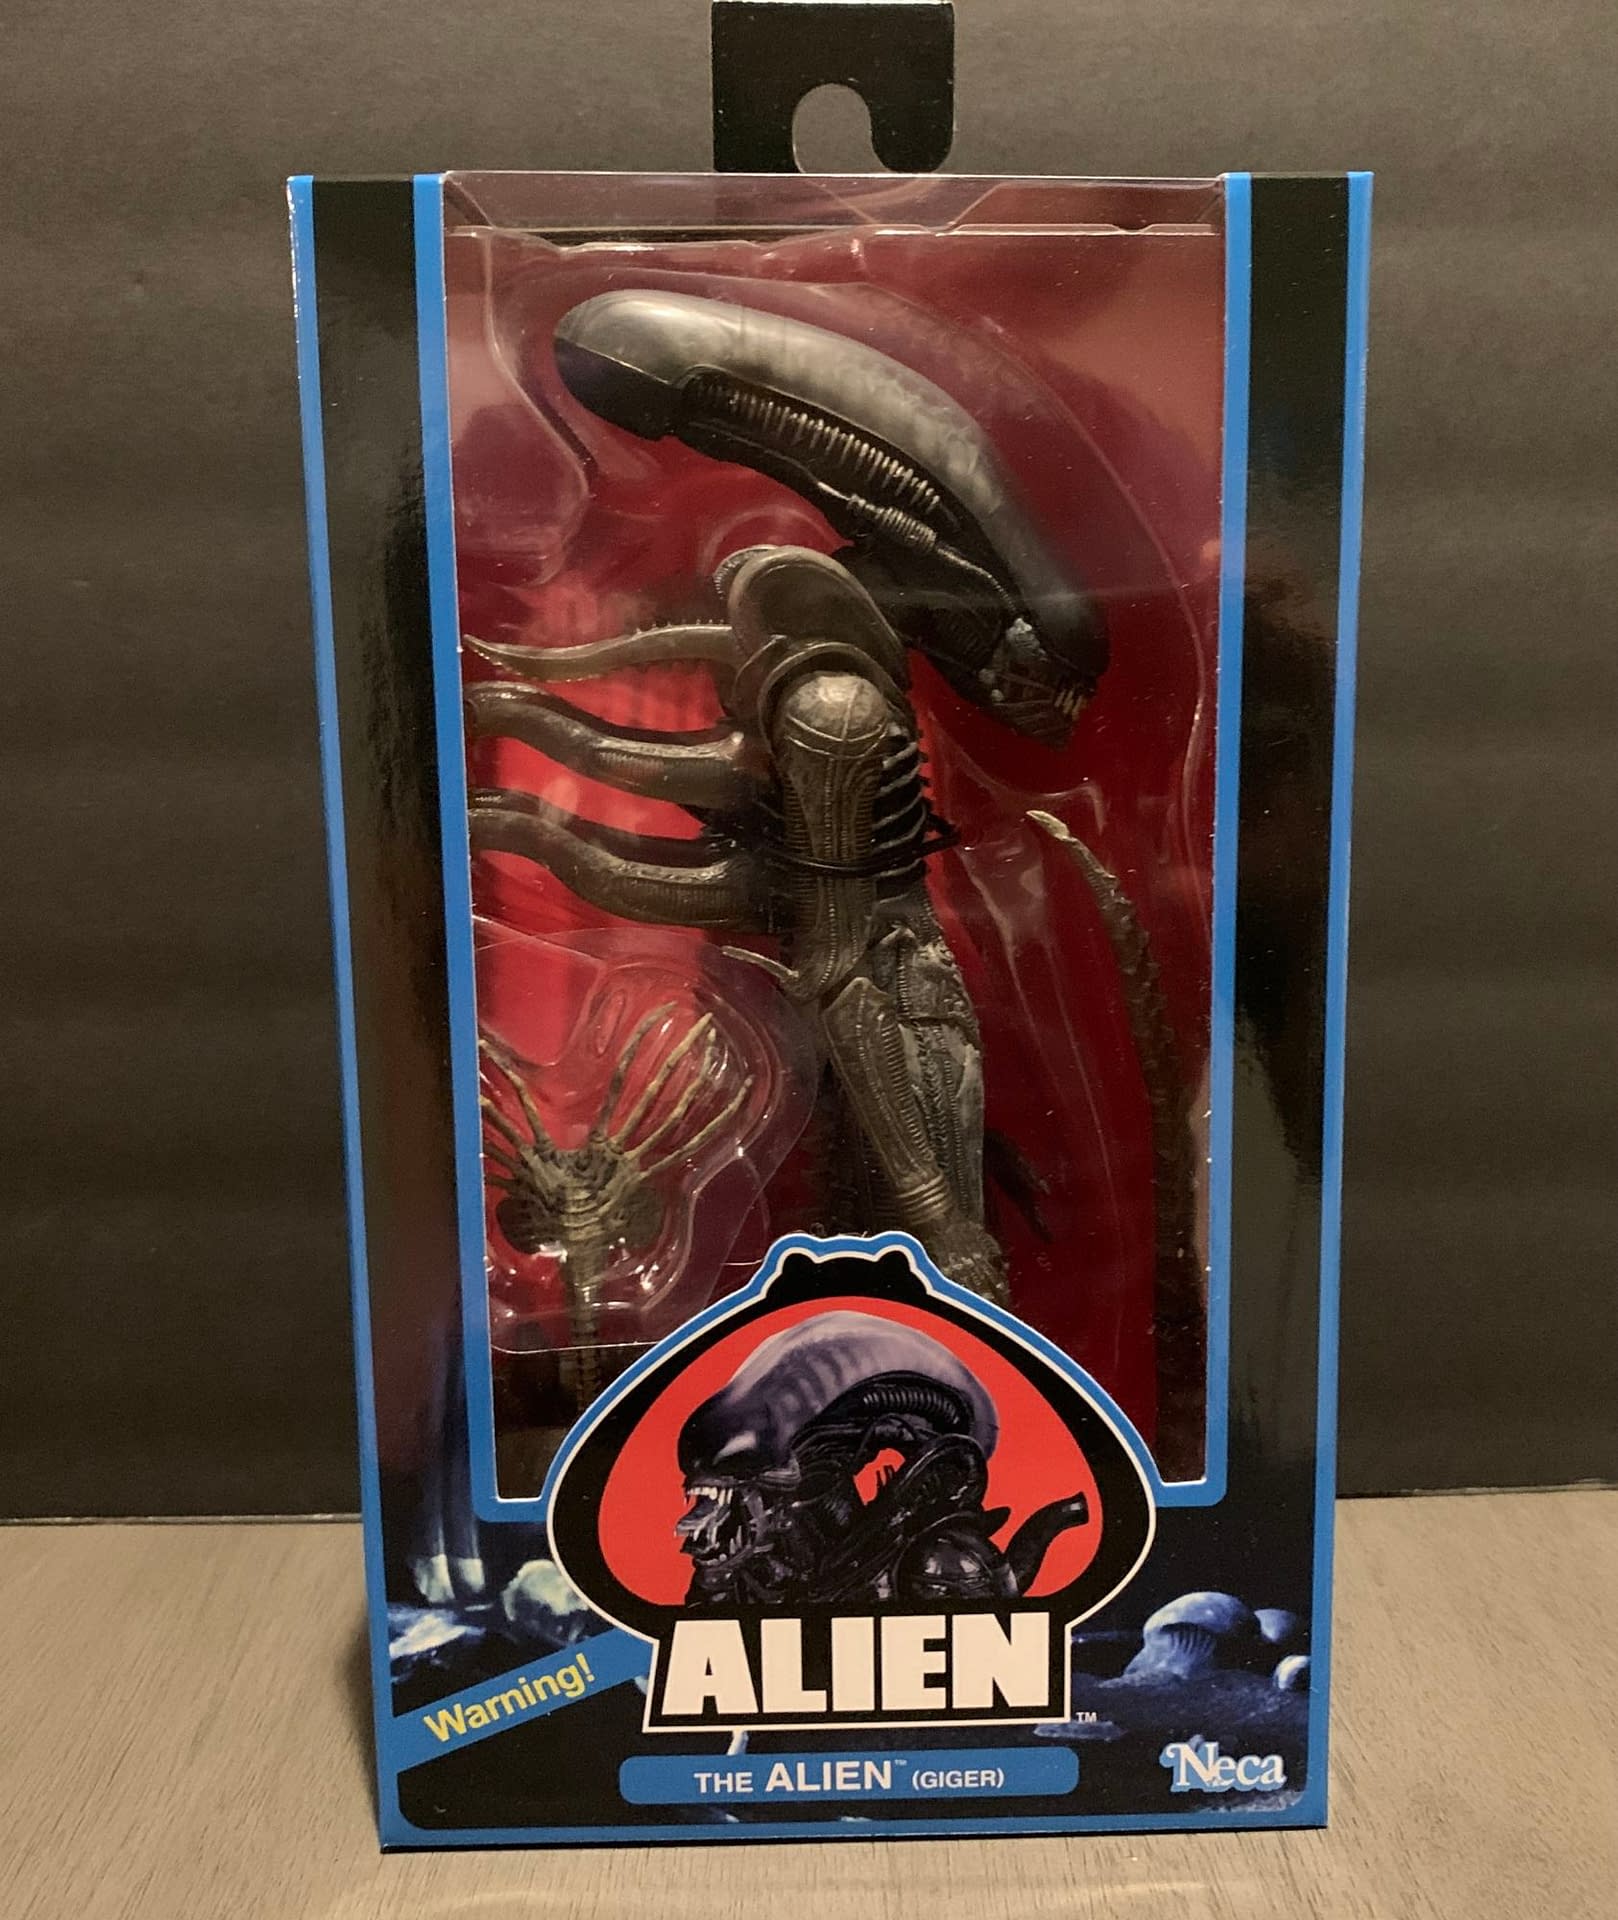 NECA's Final Wave Of Alien 40th Anniversary Figures Is Hitting Stores